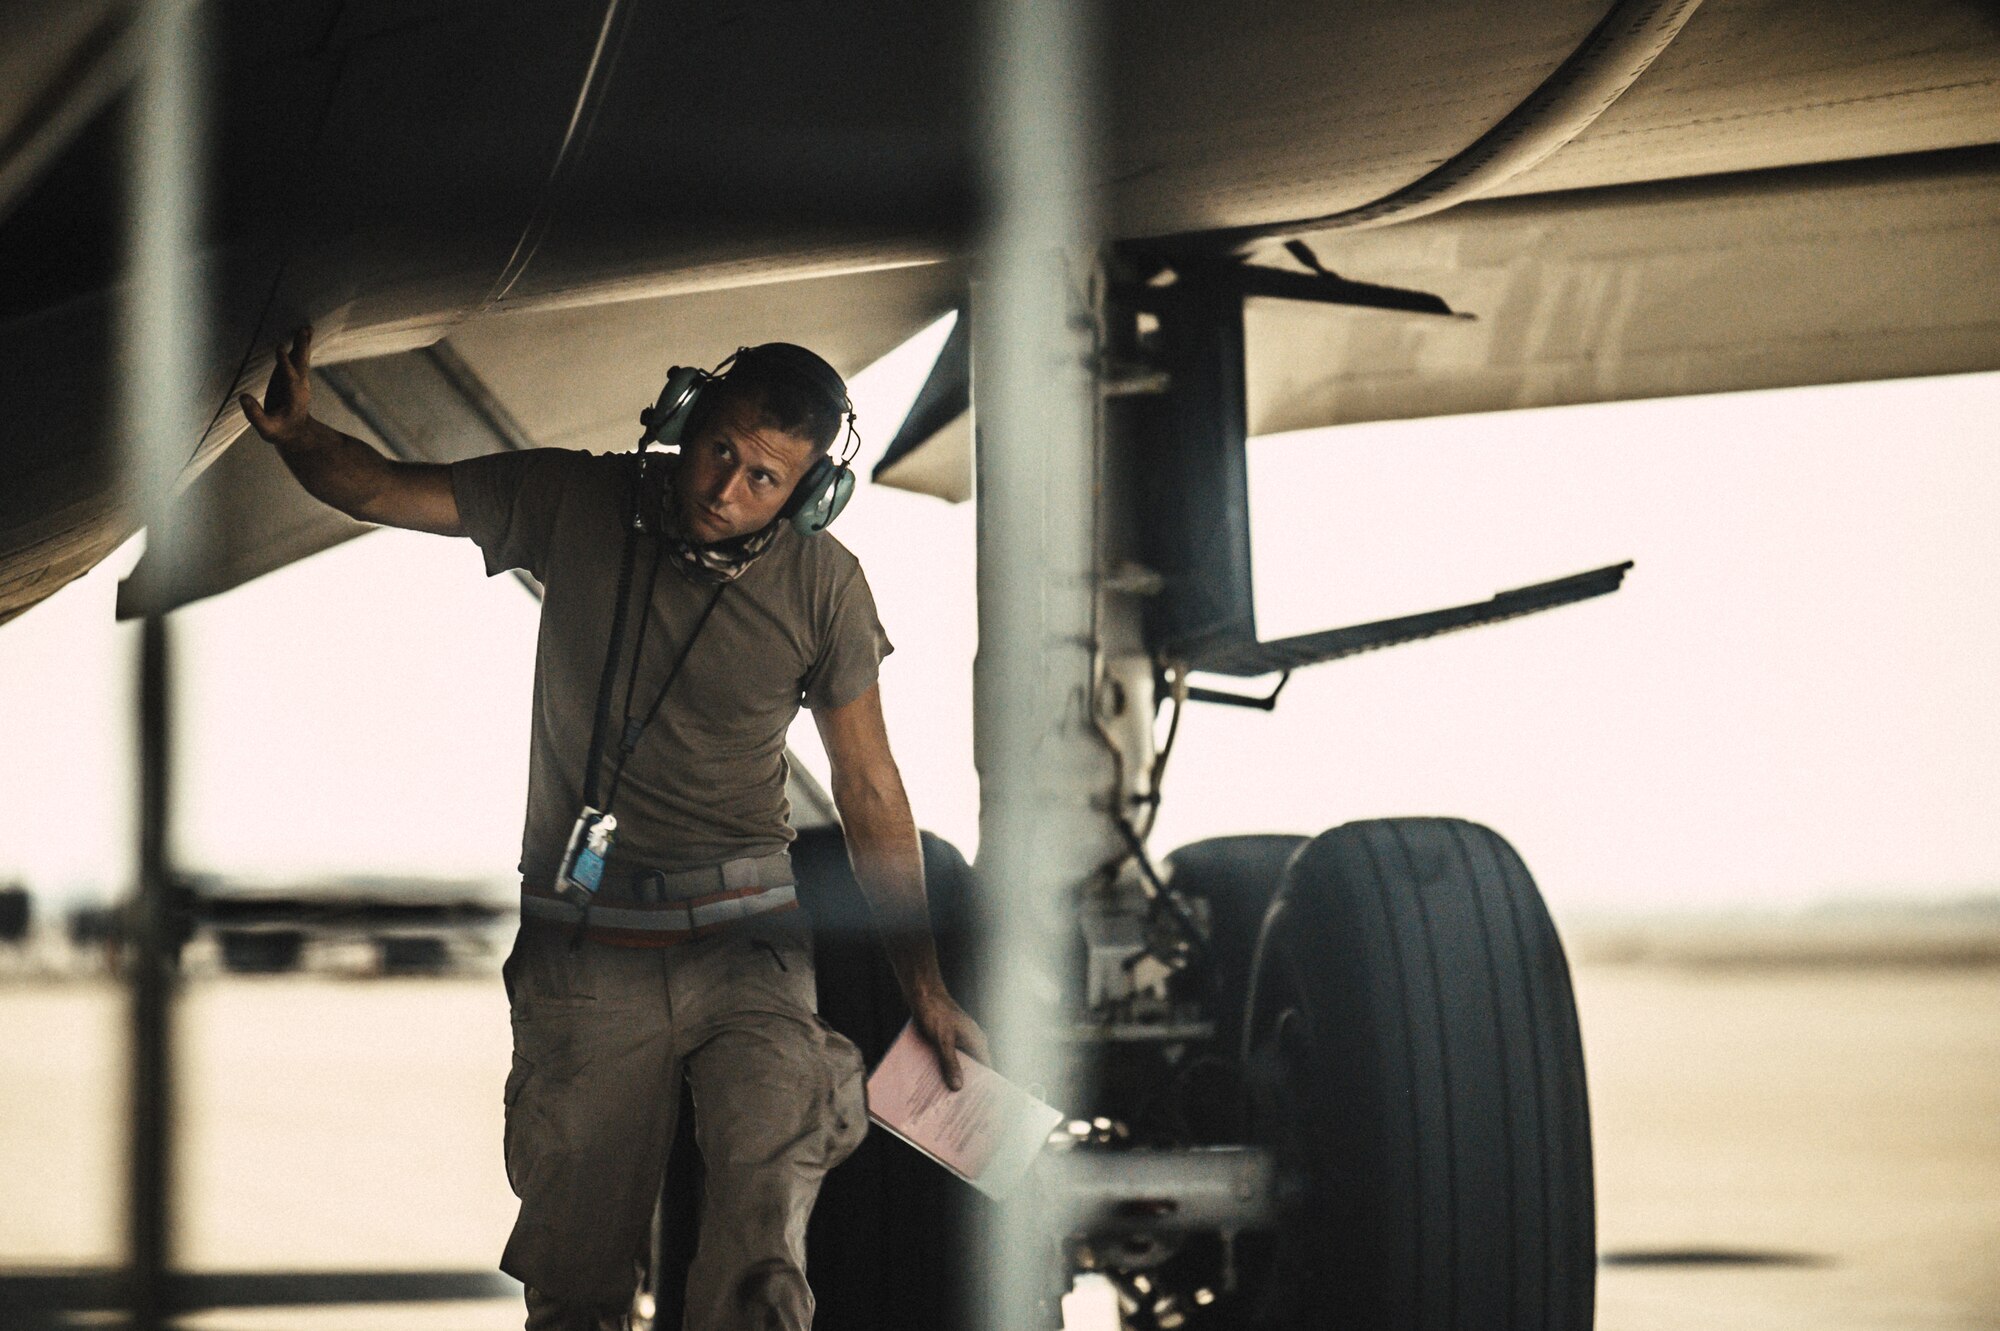 U.S. Air Force Staff Sgt. Alexander Kelly, crew chief, 379th Expeditionary Air Maintenance Squadron, performs a preflight inspection on a KC-135 Stratotanker at Al Udeid Air Base, Qatar, Nov. 18, 2020. Alongside the 379th Expeditionary Logistics Readiness Squadron, the 379th EAMXS conducted a hot-refueling training, qualifying deployed Airmen to refuel the KC-135 while its engines remained running. This capability allows KC-135 flight crews to rapidly return to their mission in the CENTCOM area of responsibility. (U.S. Air National Guard photo by Staff Sgt. Jordan Martin)